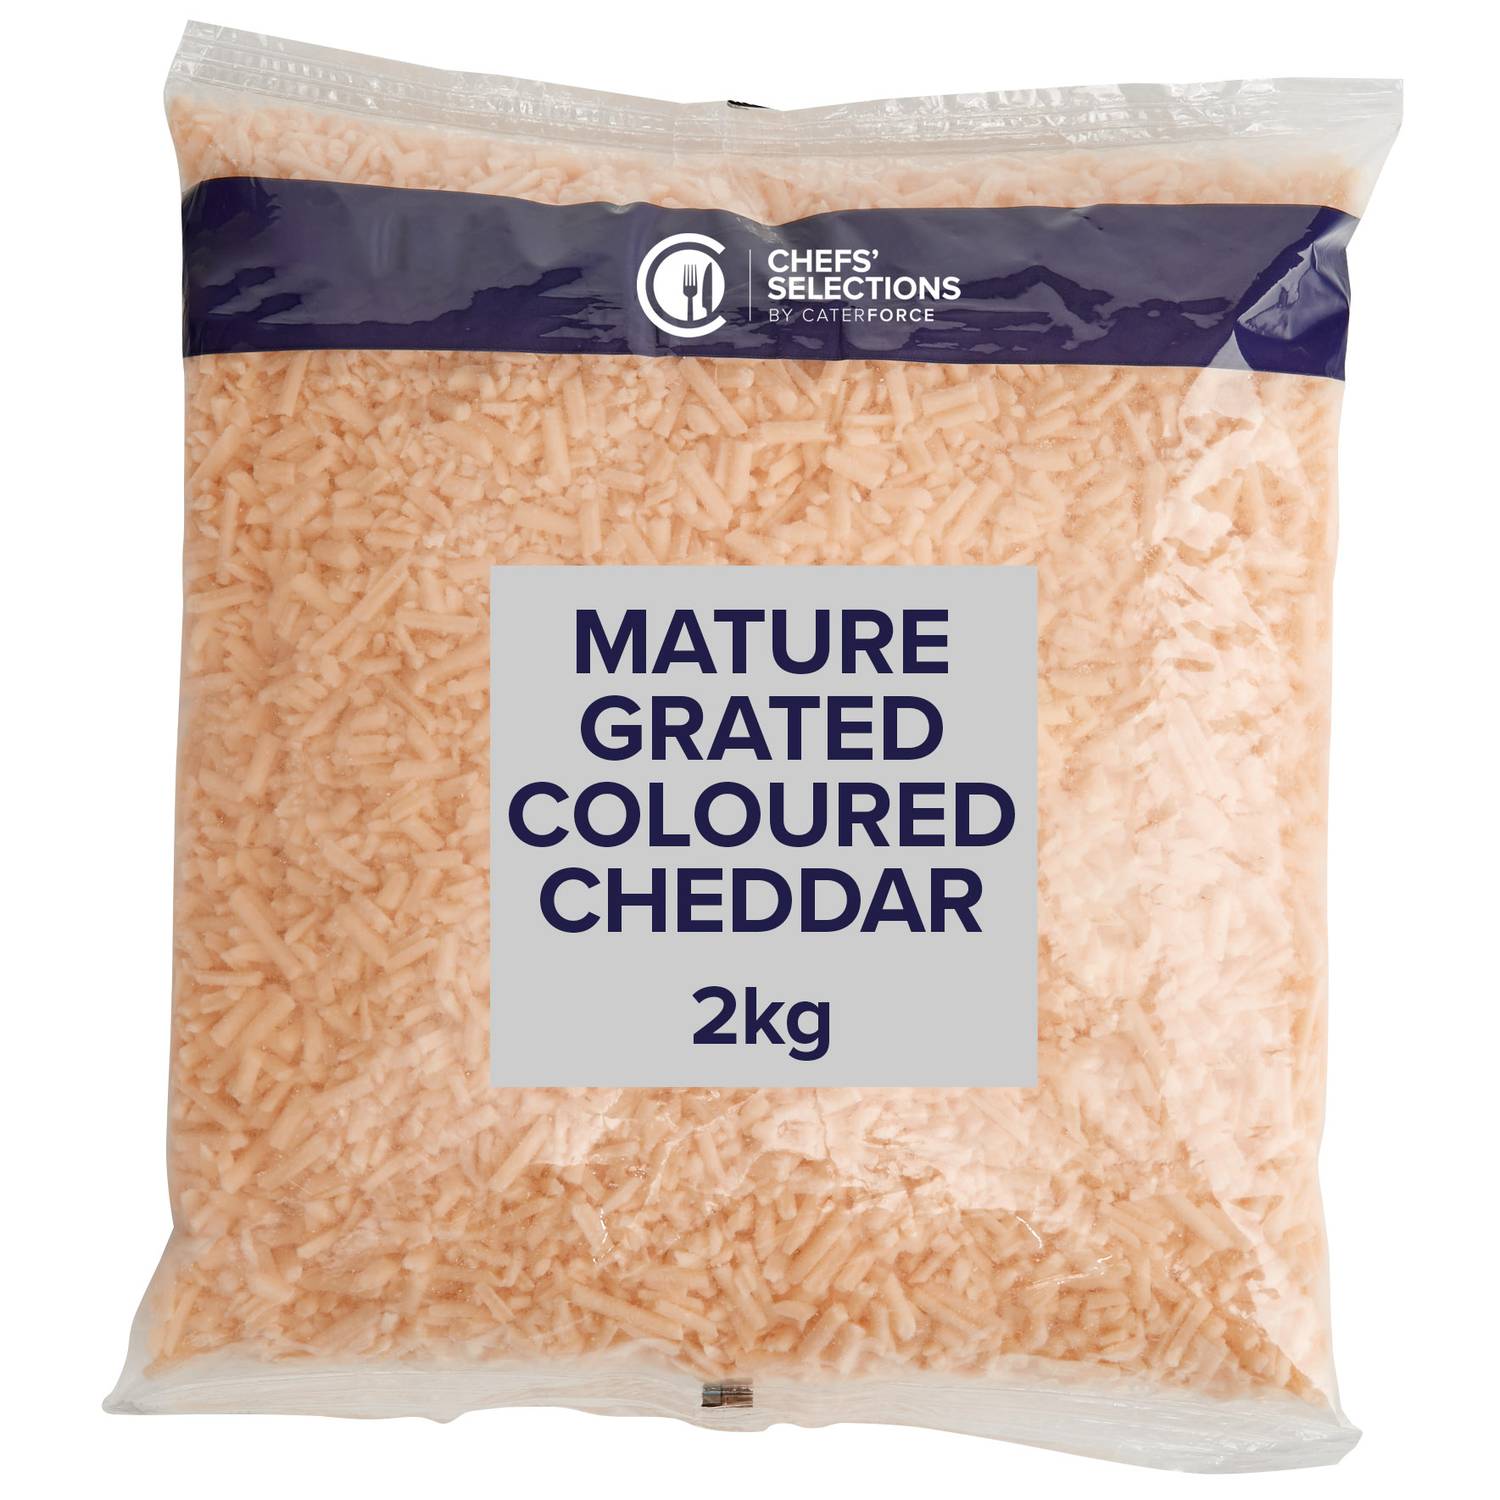 Chefs’ Selections Grated Coloured Mature Cheddar (6 x 2kg)